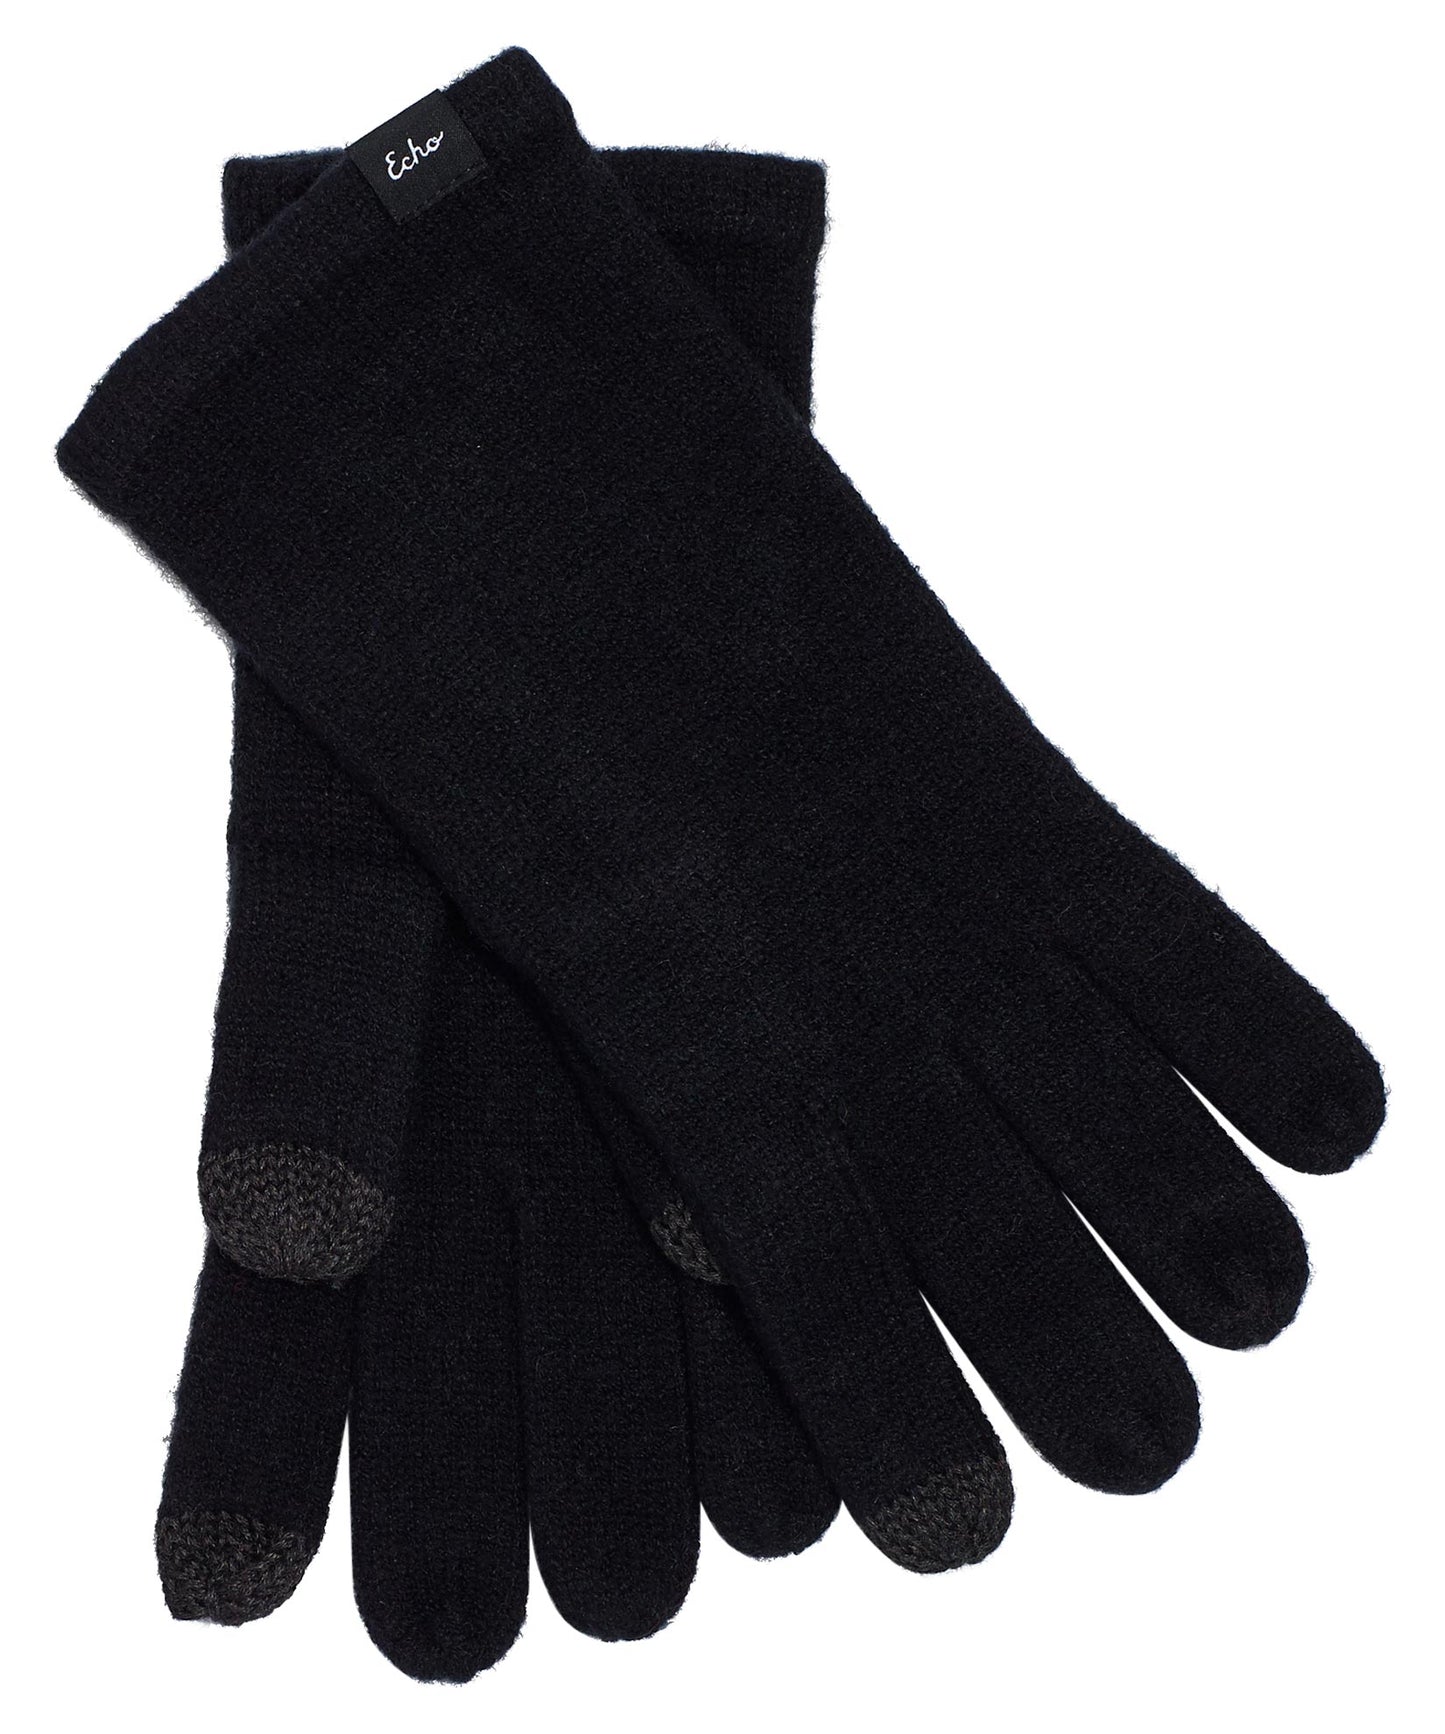 Echo Knit Touch Glove in color Echo Black